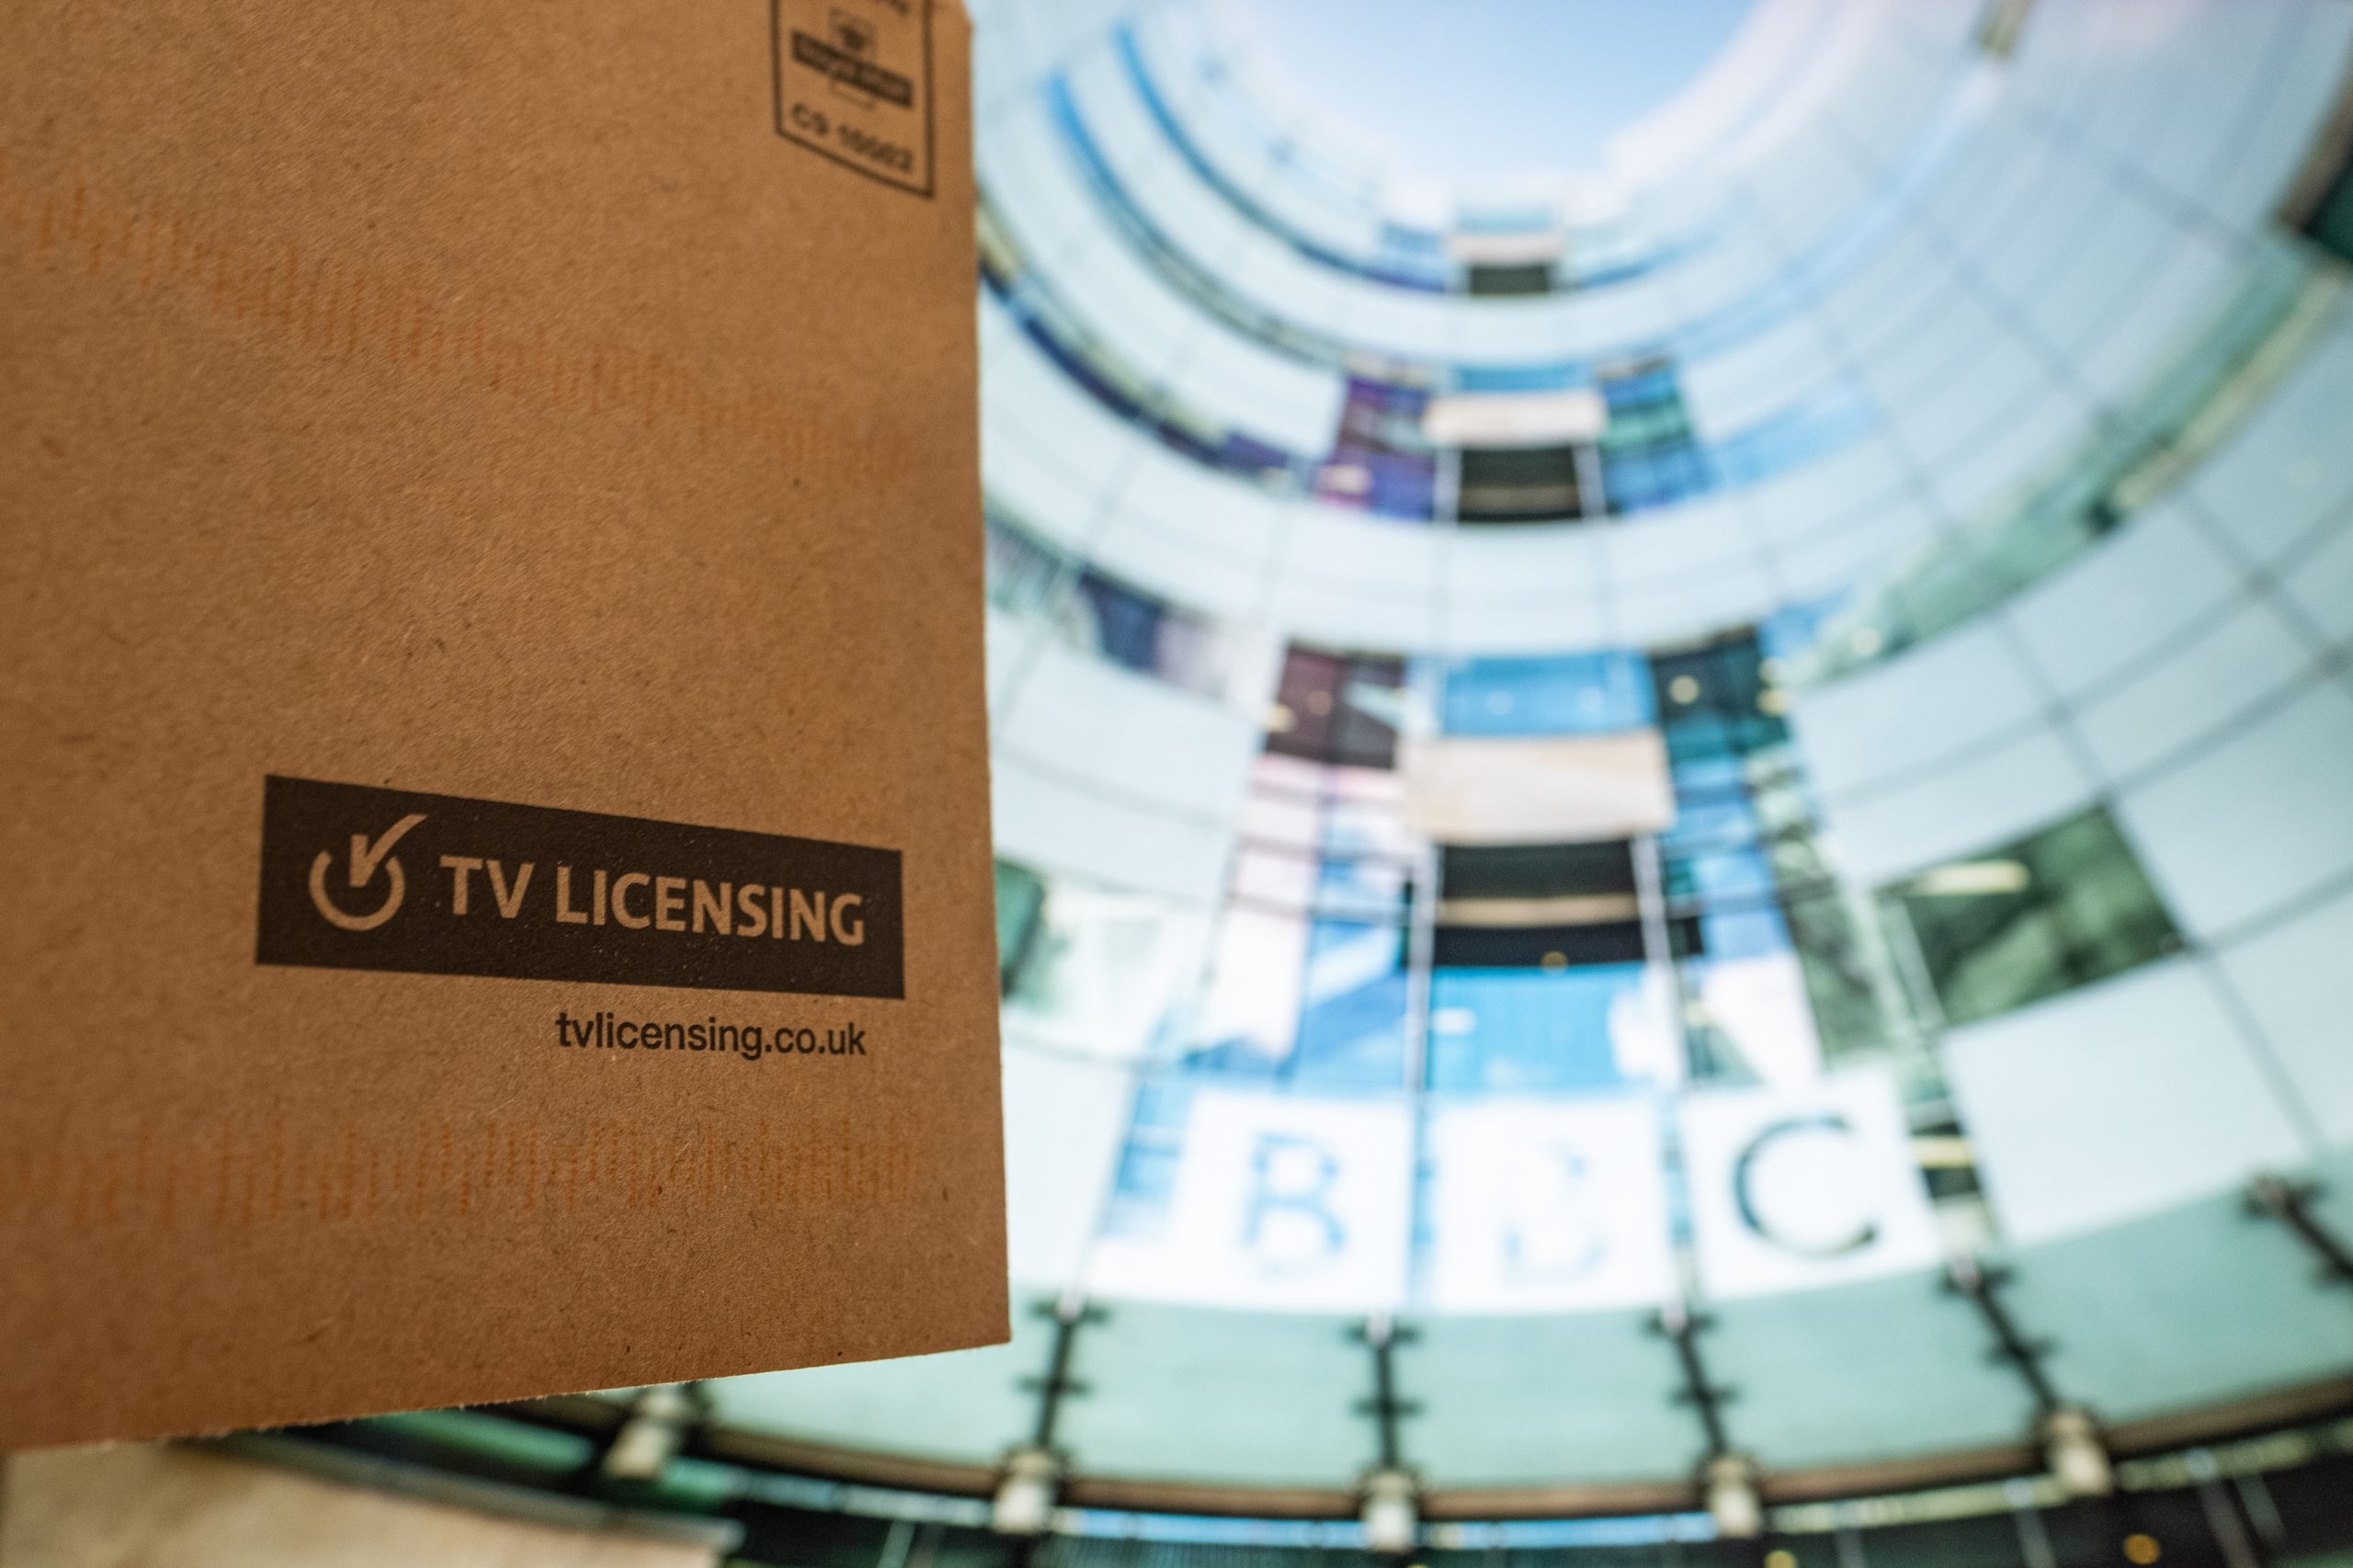 TV Licence envelope against an image of the BBC headquarters.